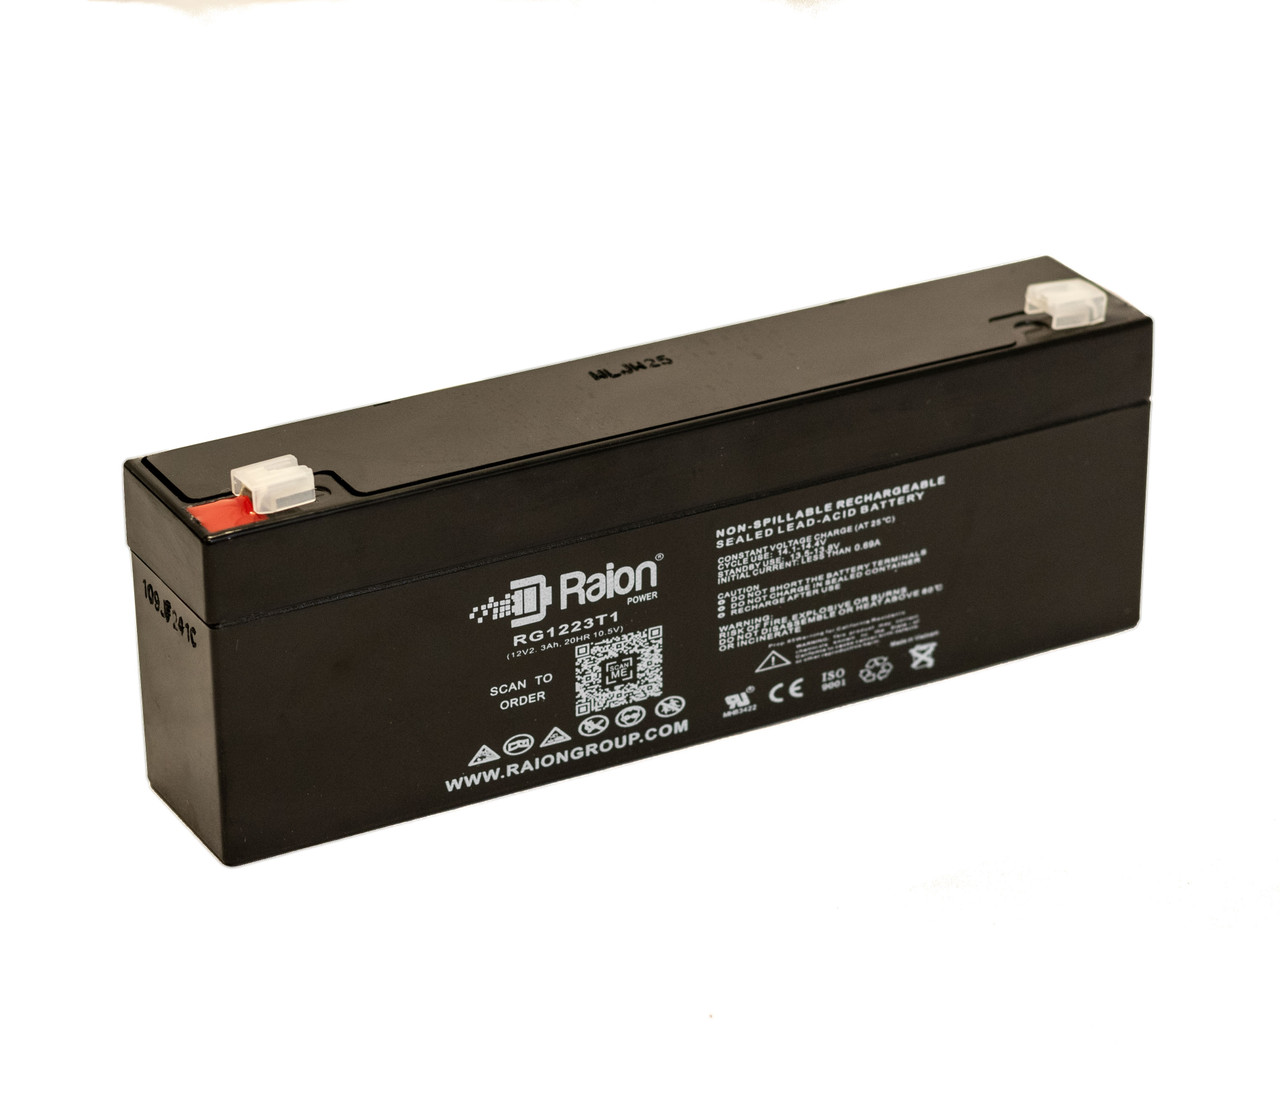 Raion Power RG1223T1 Replacement Battery for Colin Medical 8800C Pressmate